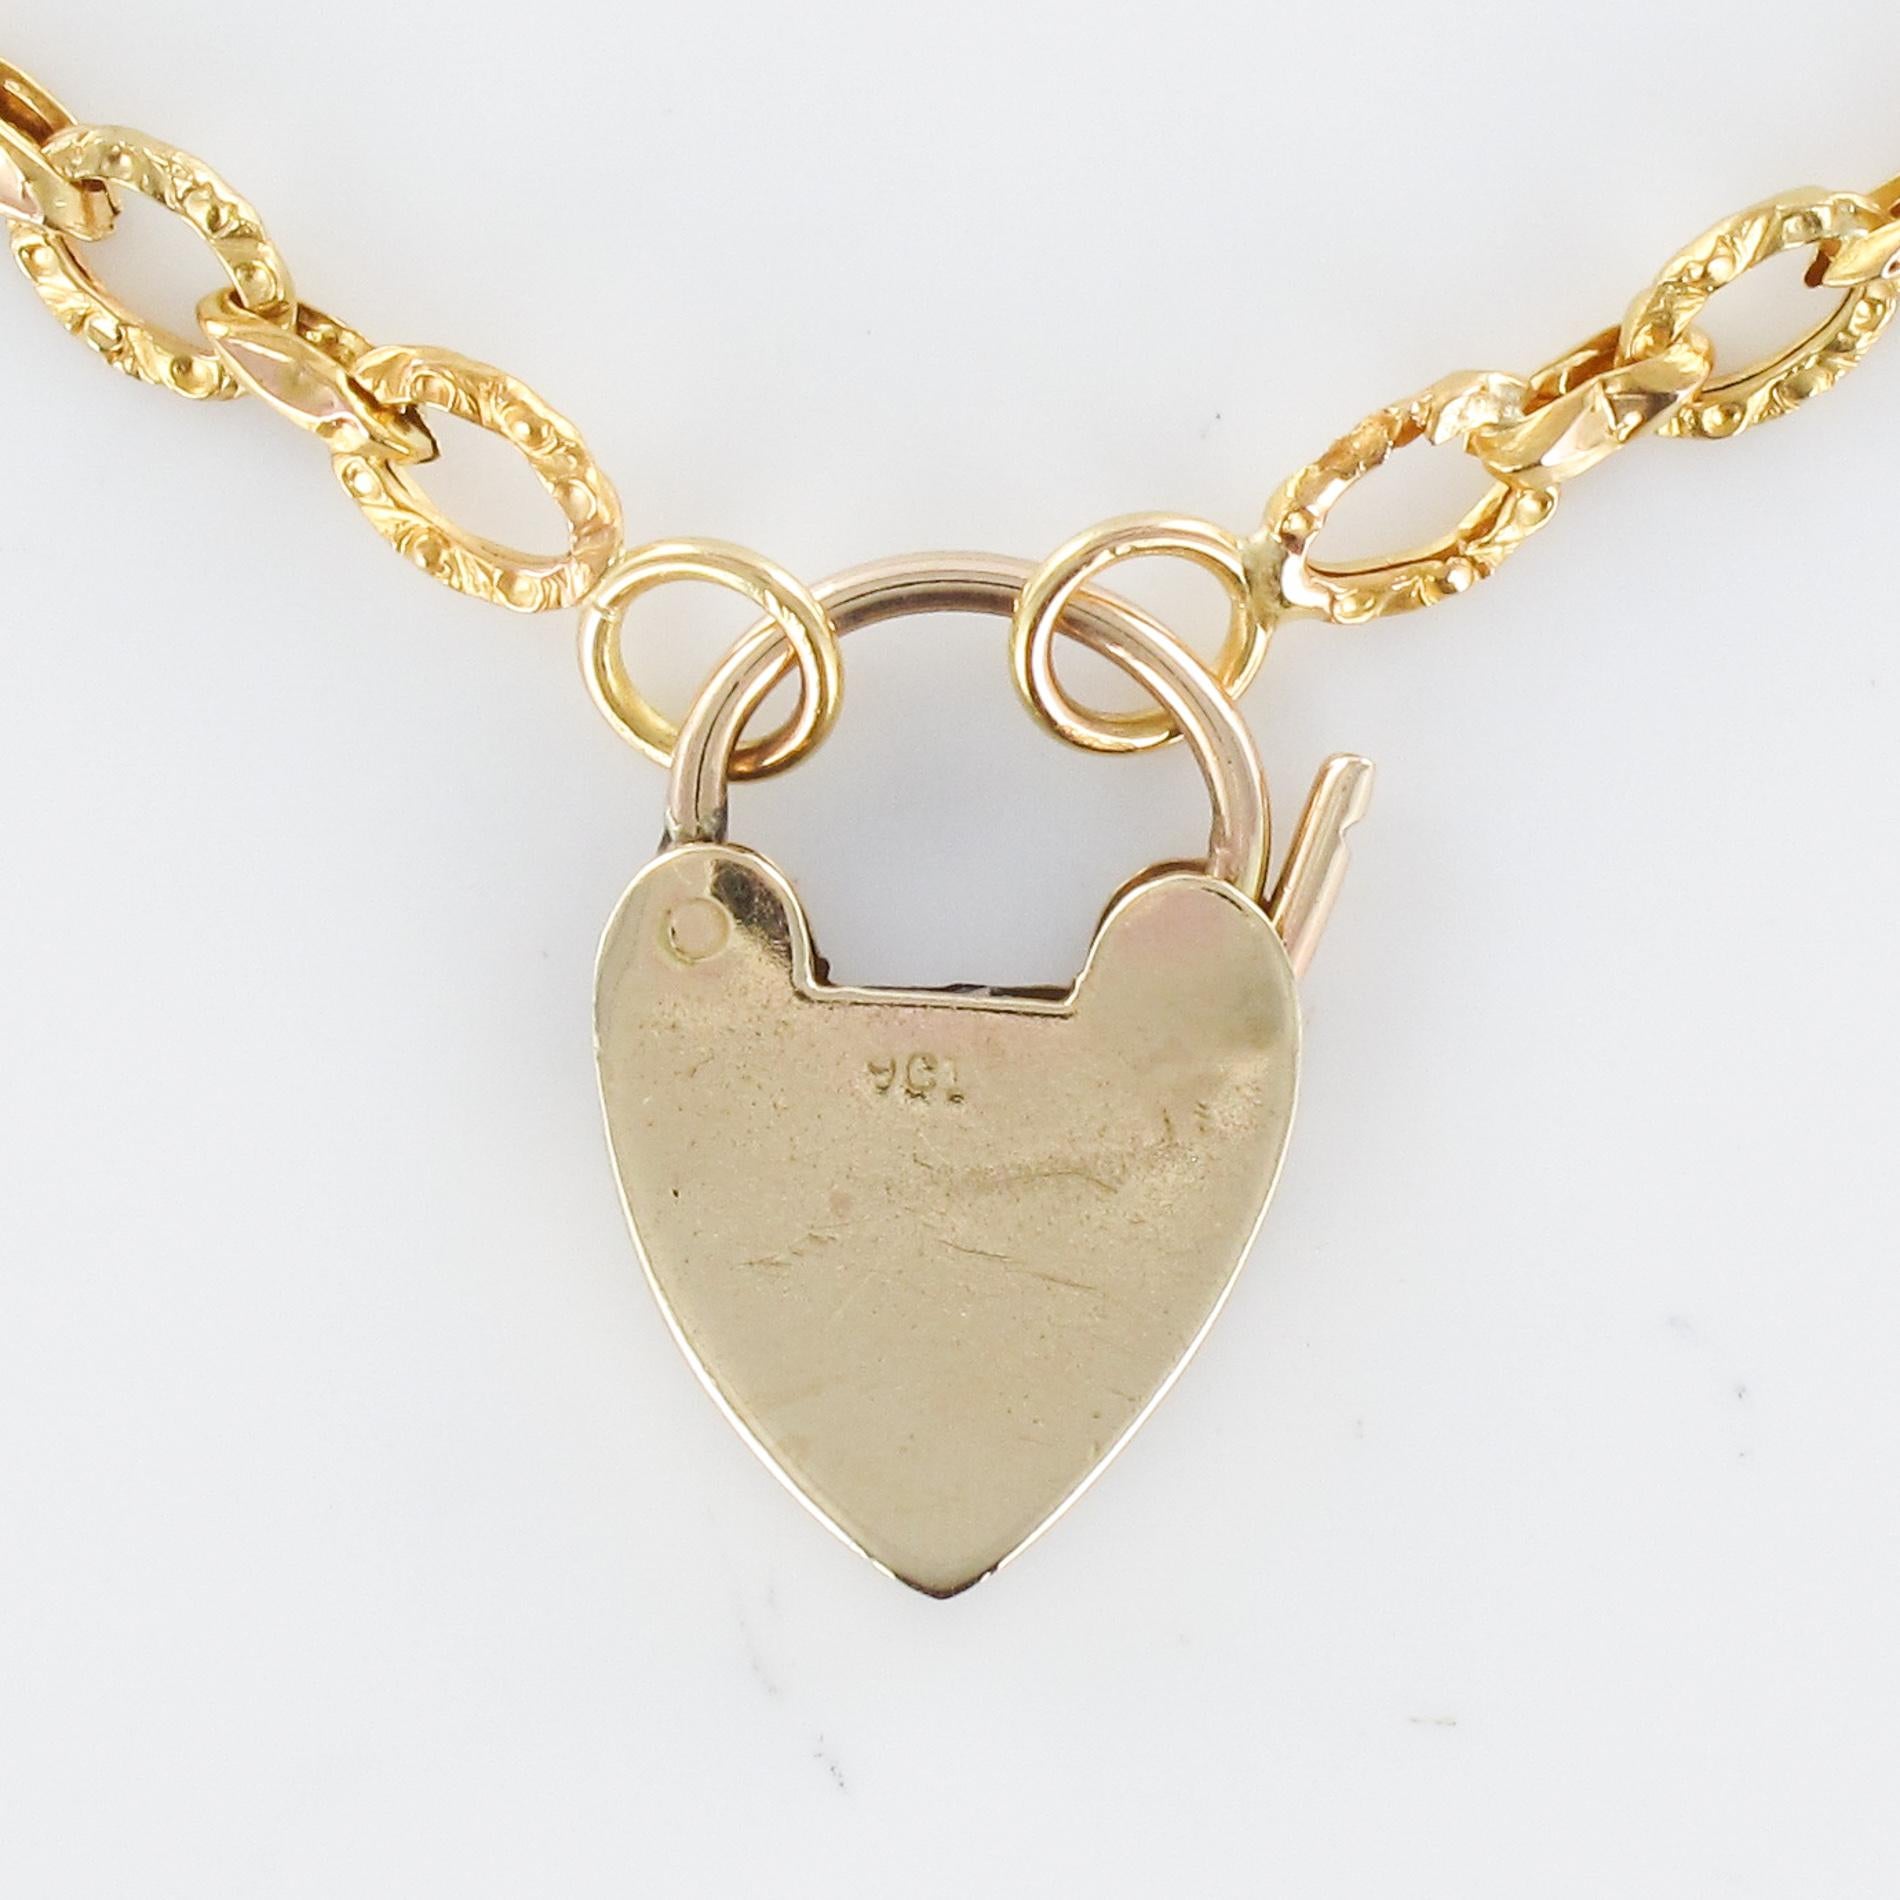 19th Century 18 Karat Yellow Gold Chiseled Chain Heart-Shaped Padlock Necklace For Sale 3